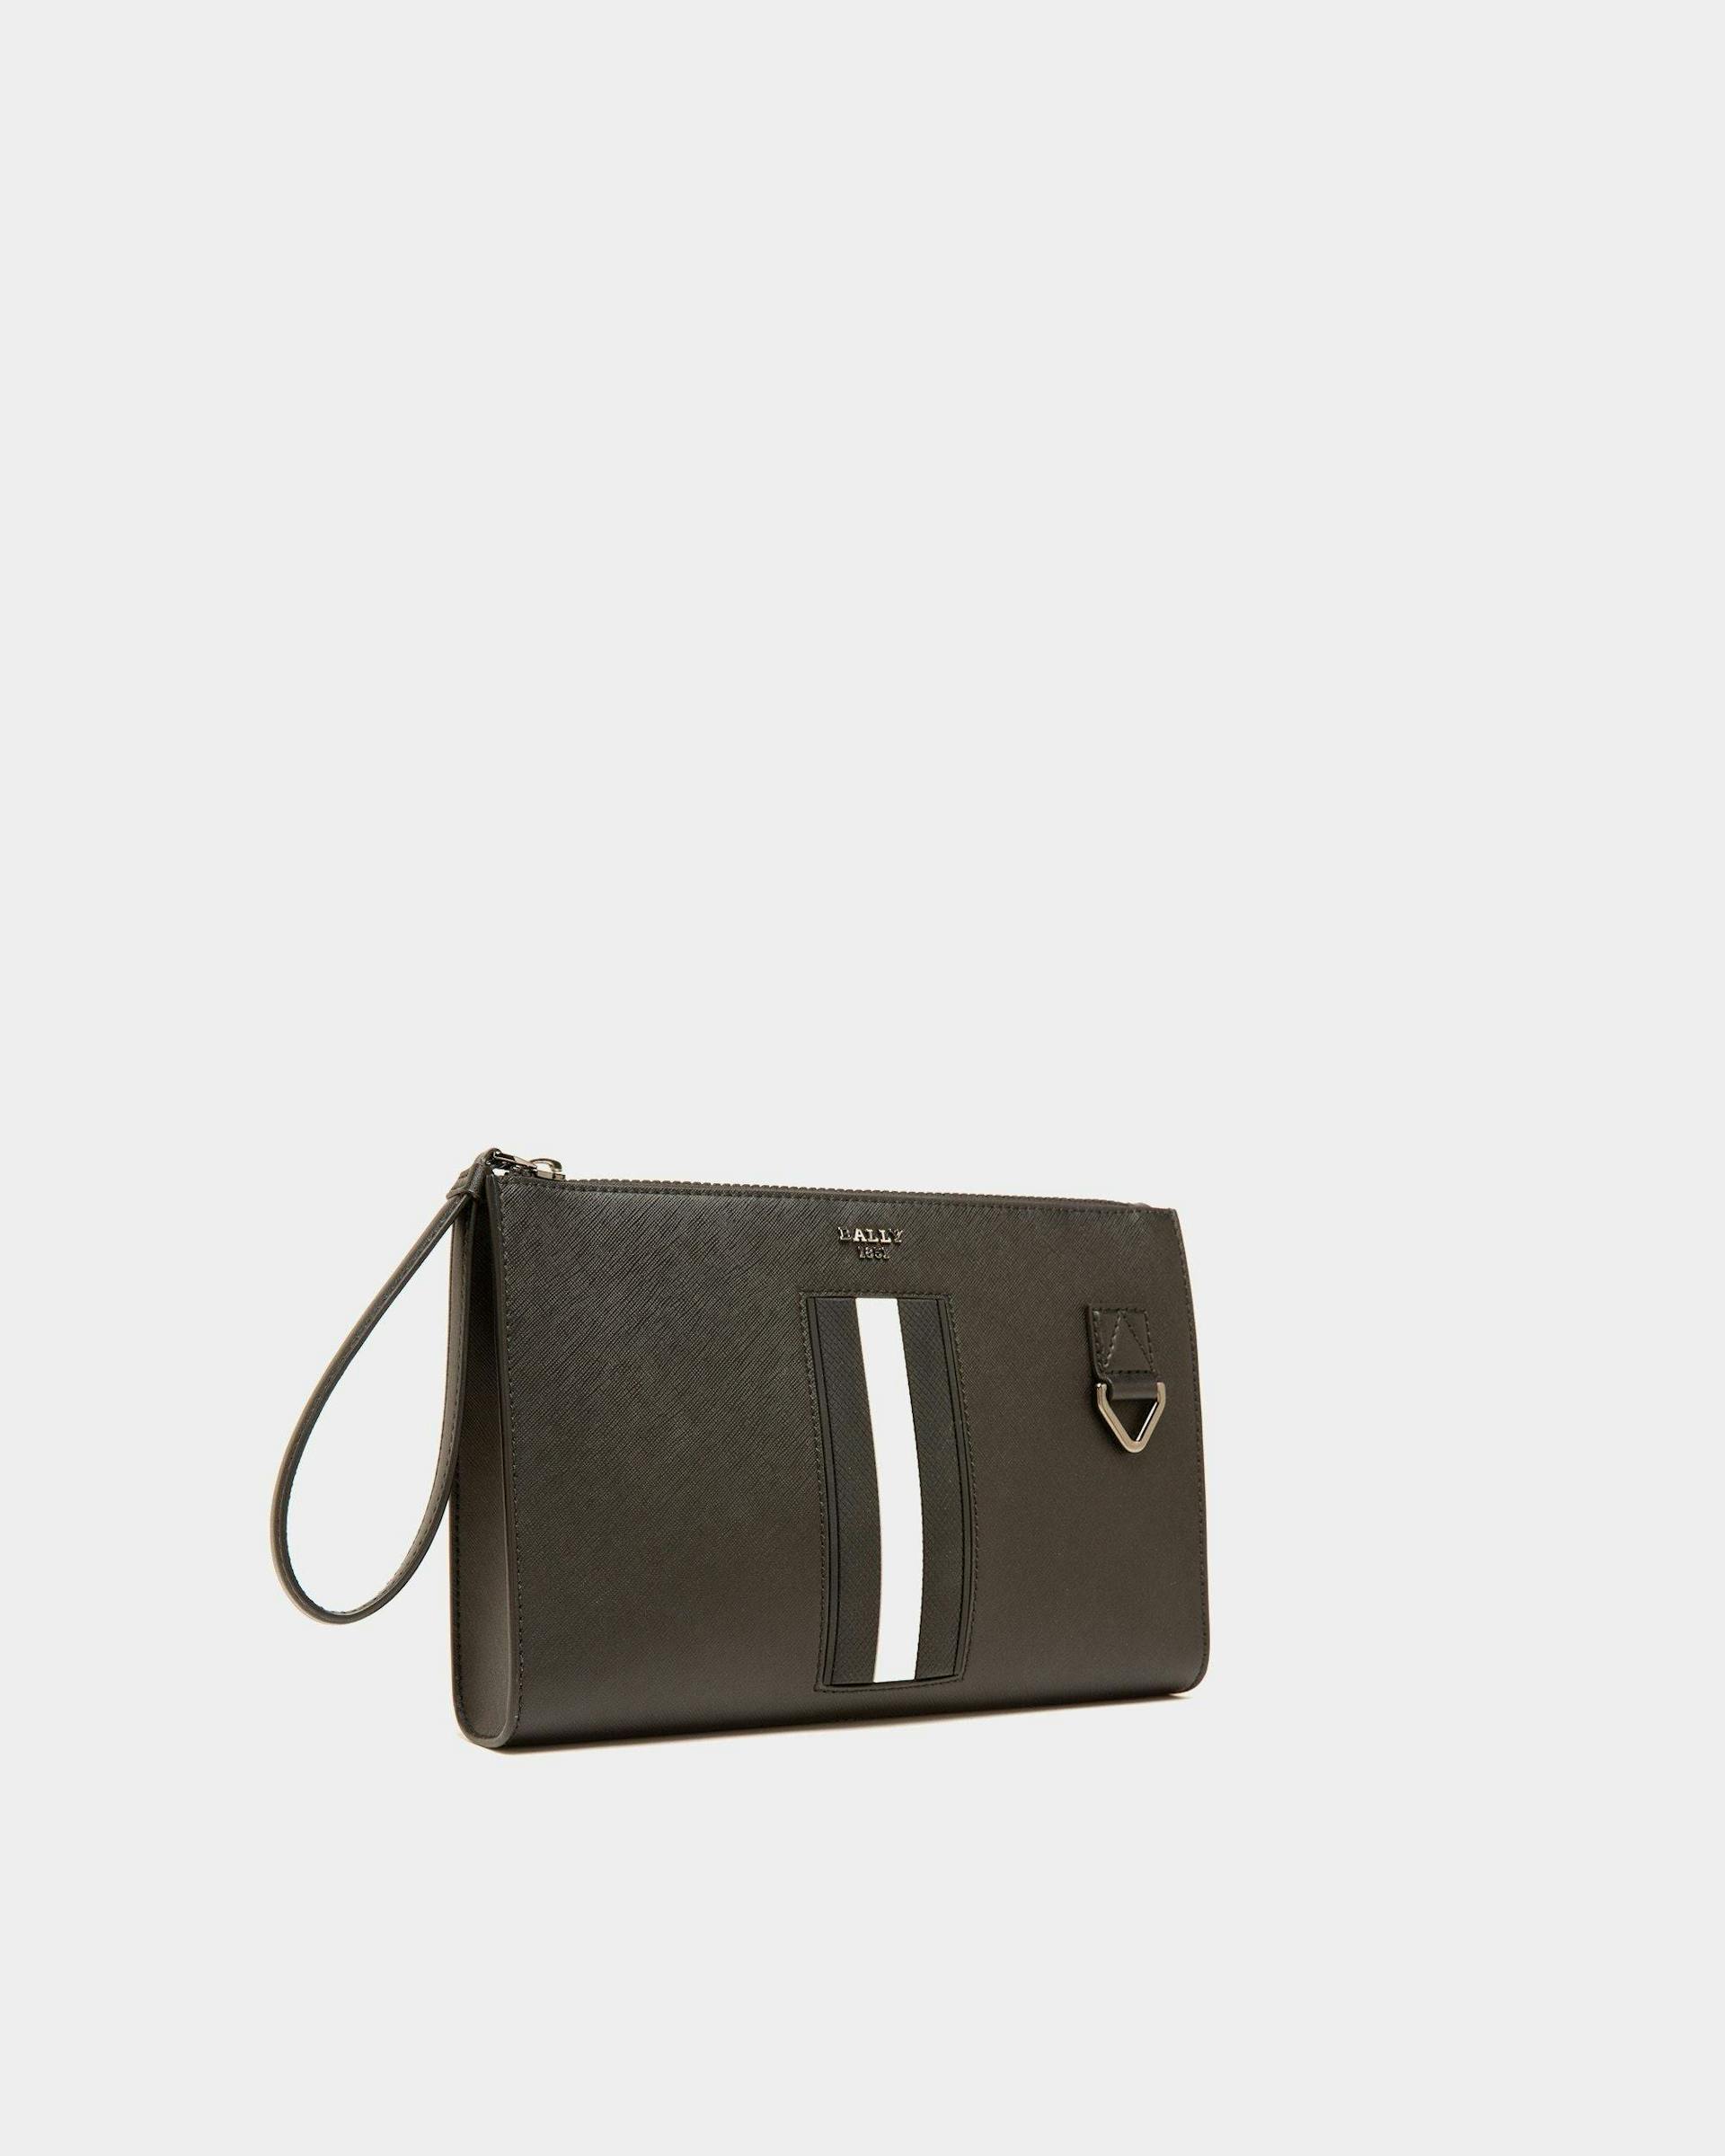 Men's Mythos Clutch In Black Leather | Bally | Still Life 3/4 Front